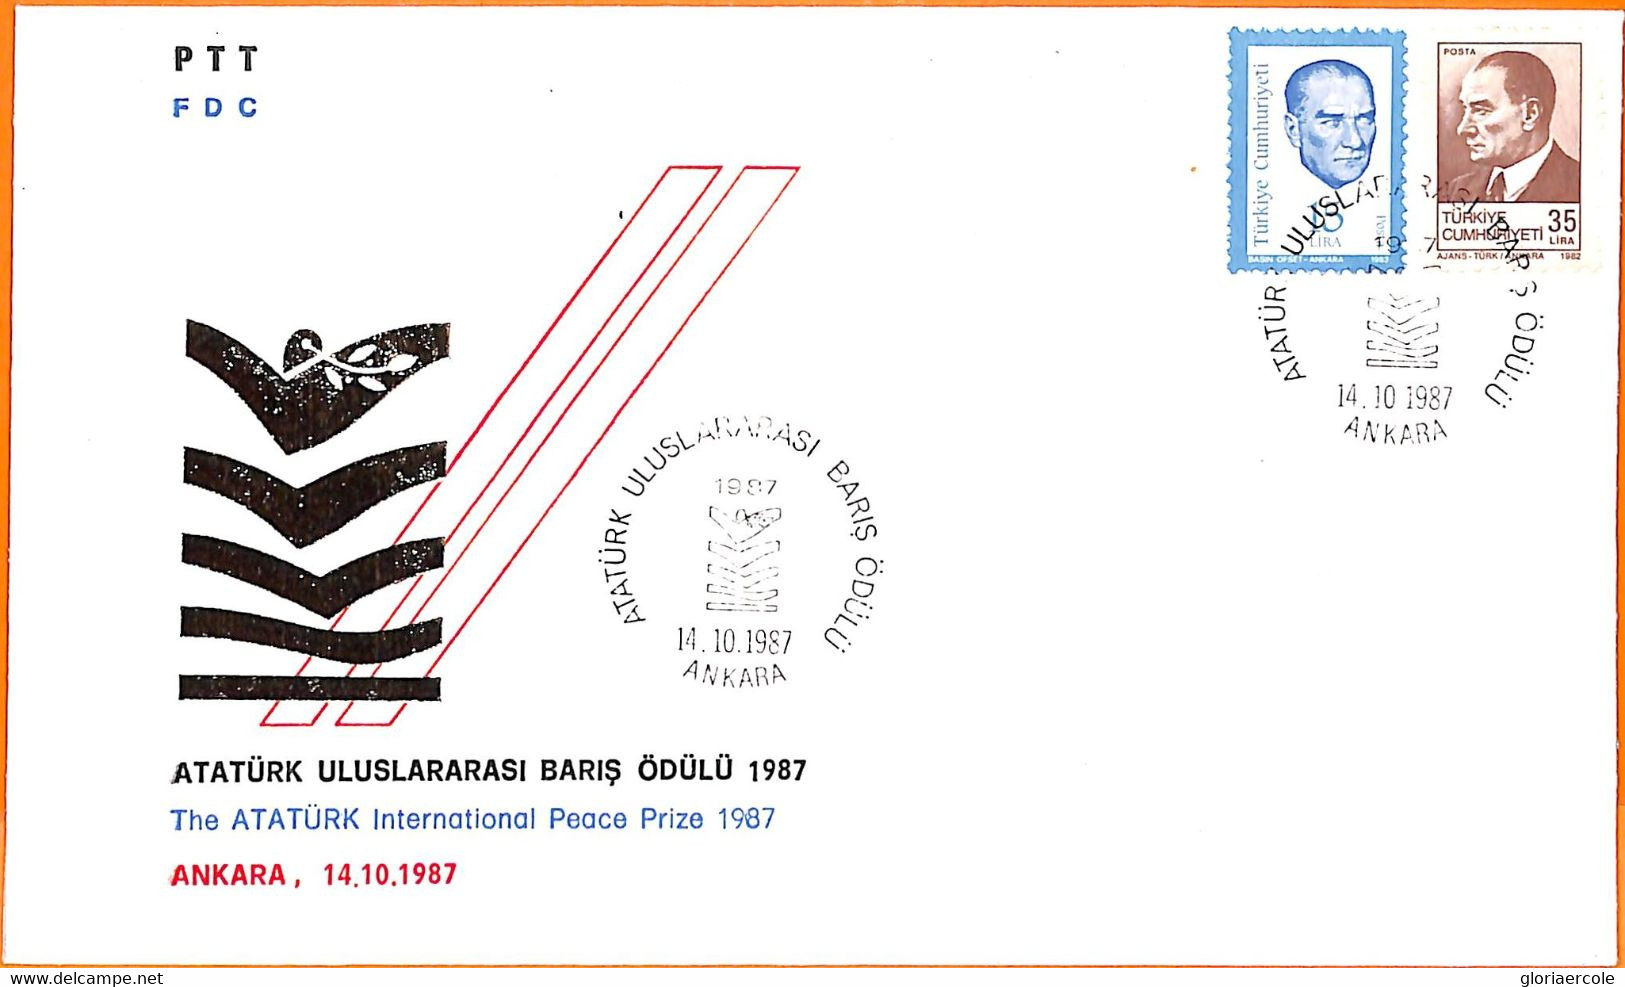 99921  - TURKEY  - POSTAL HISTORY - FDC COVER  1987 - Covers & Documents